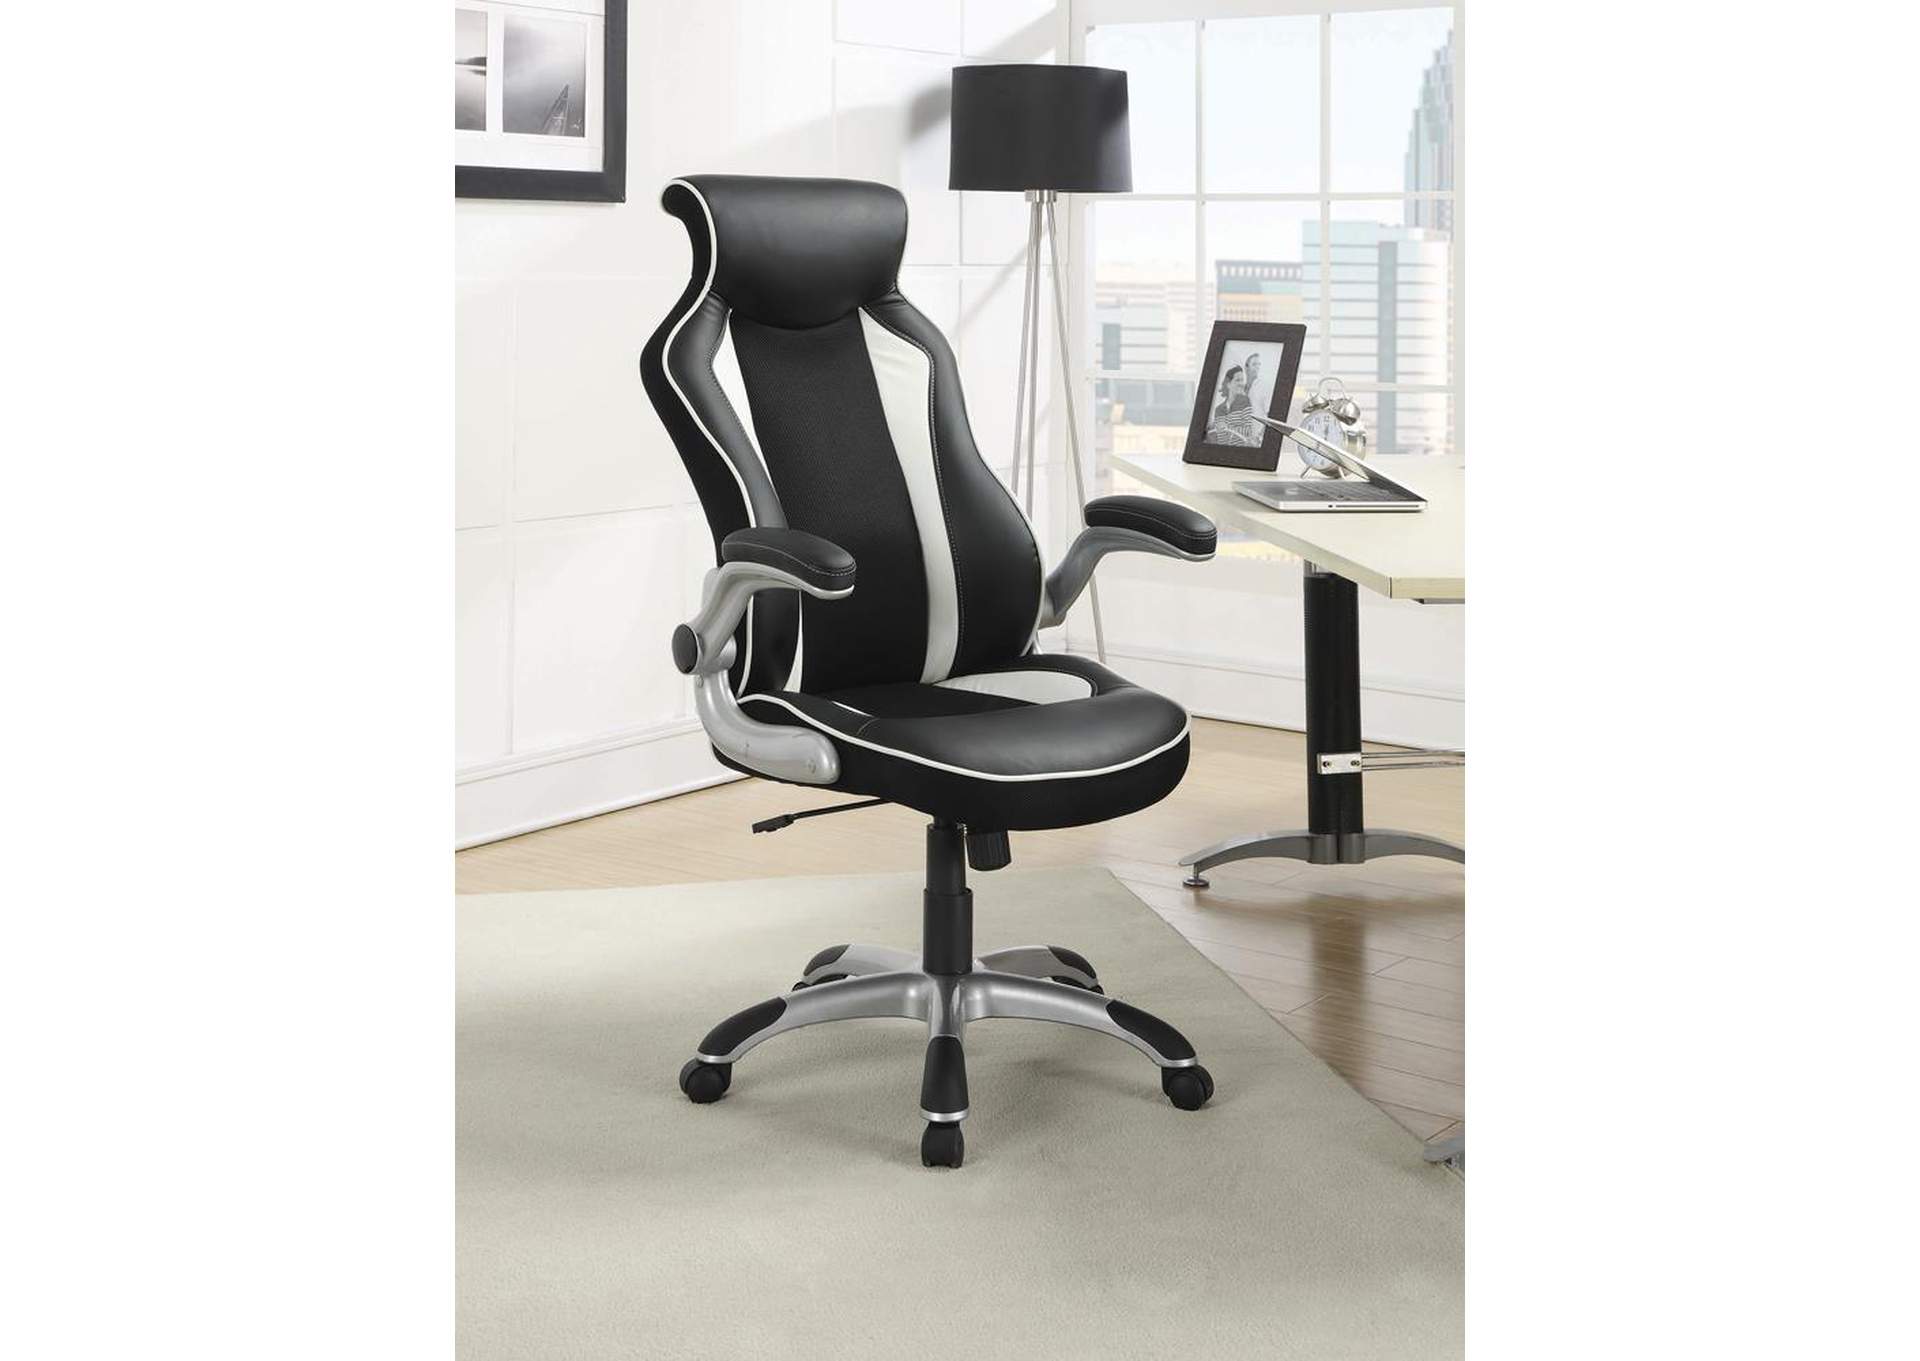 Black/ White Office Chair,ABF Coaster Furniture